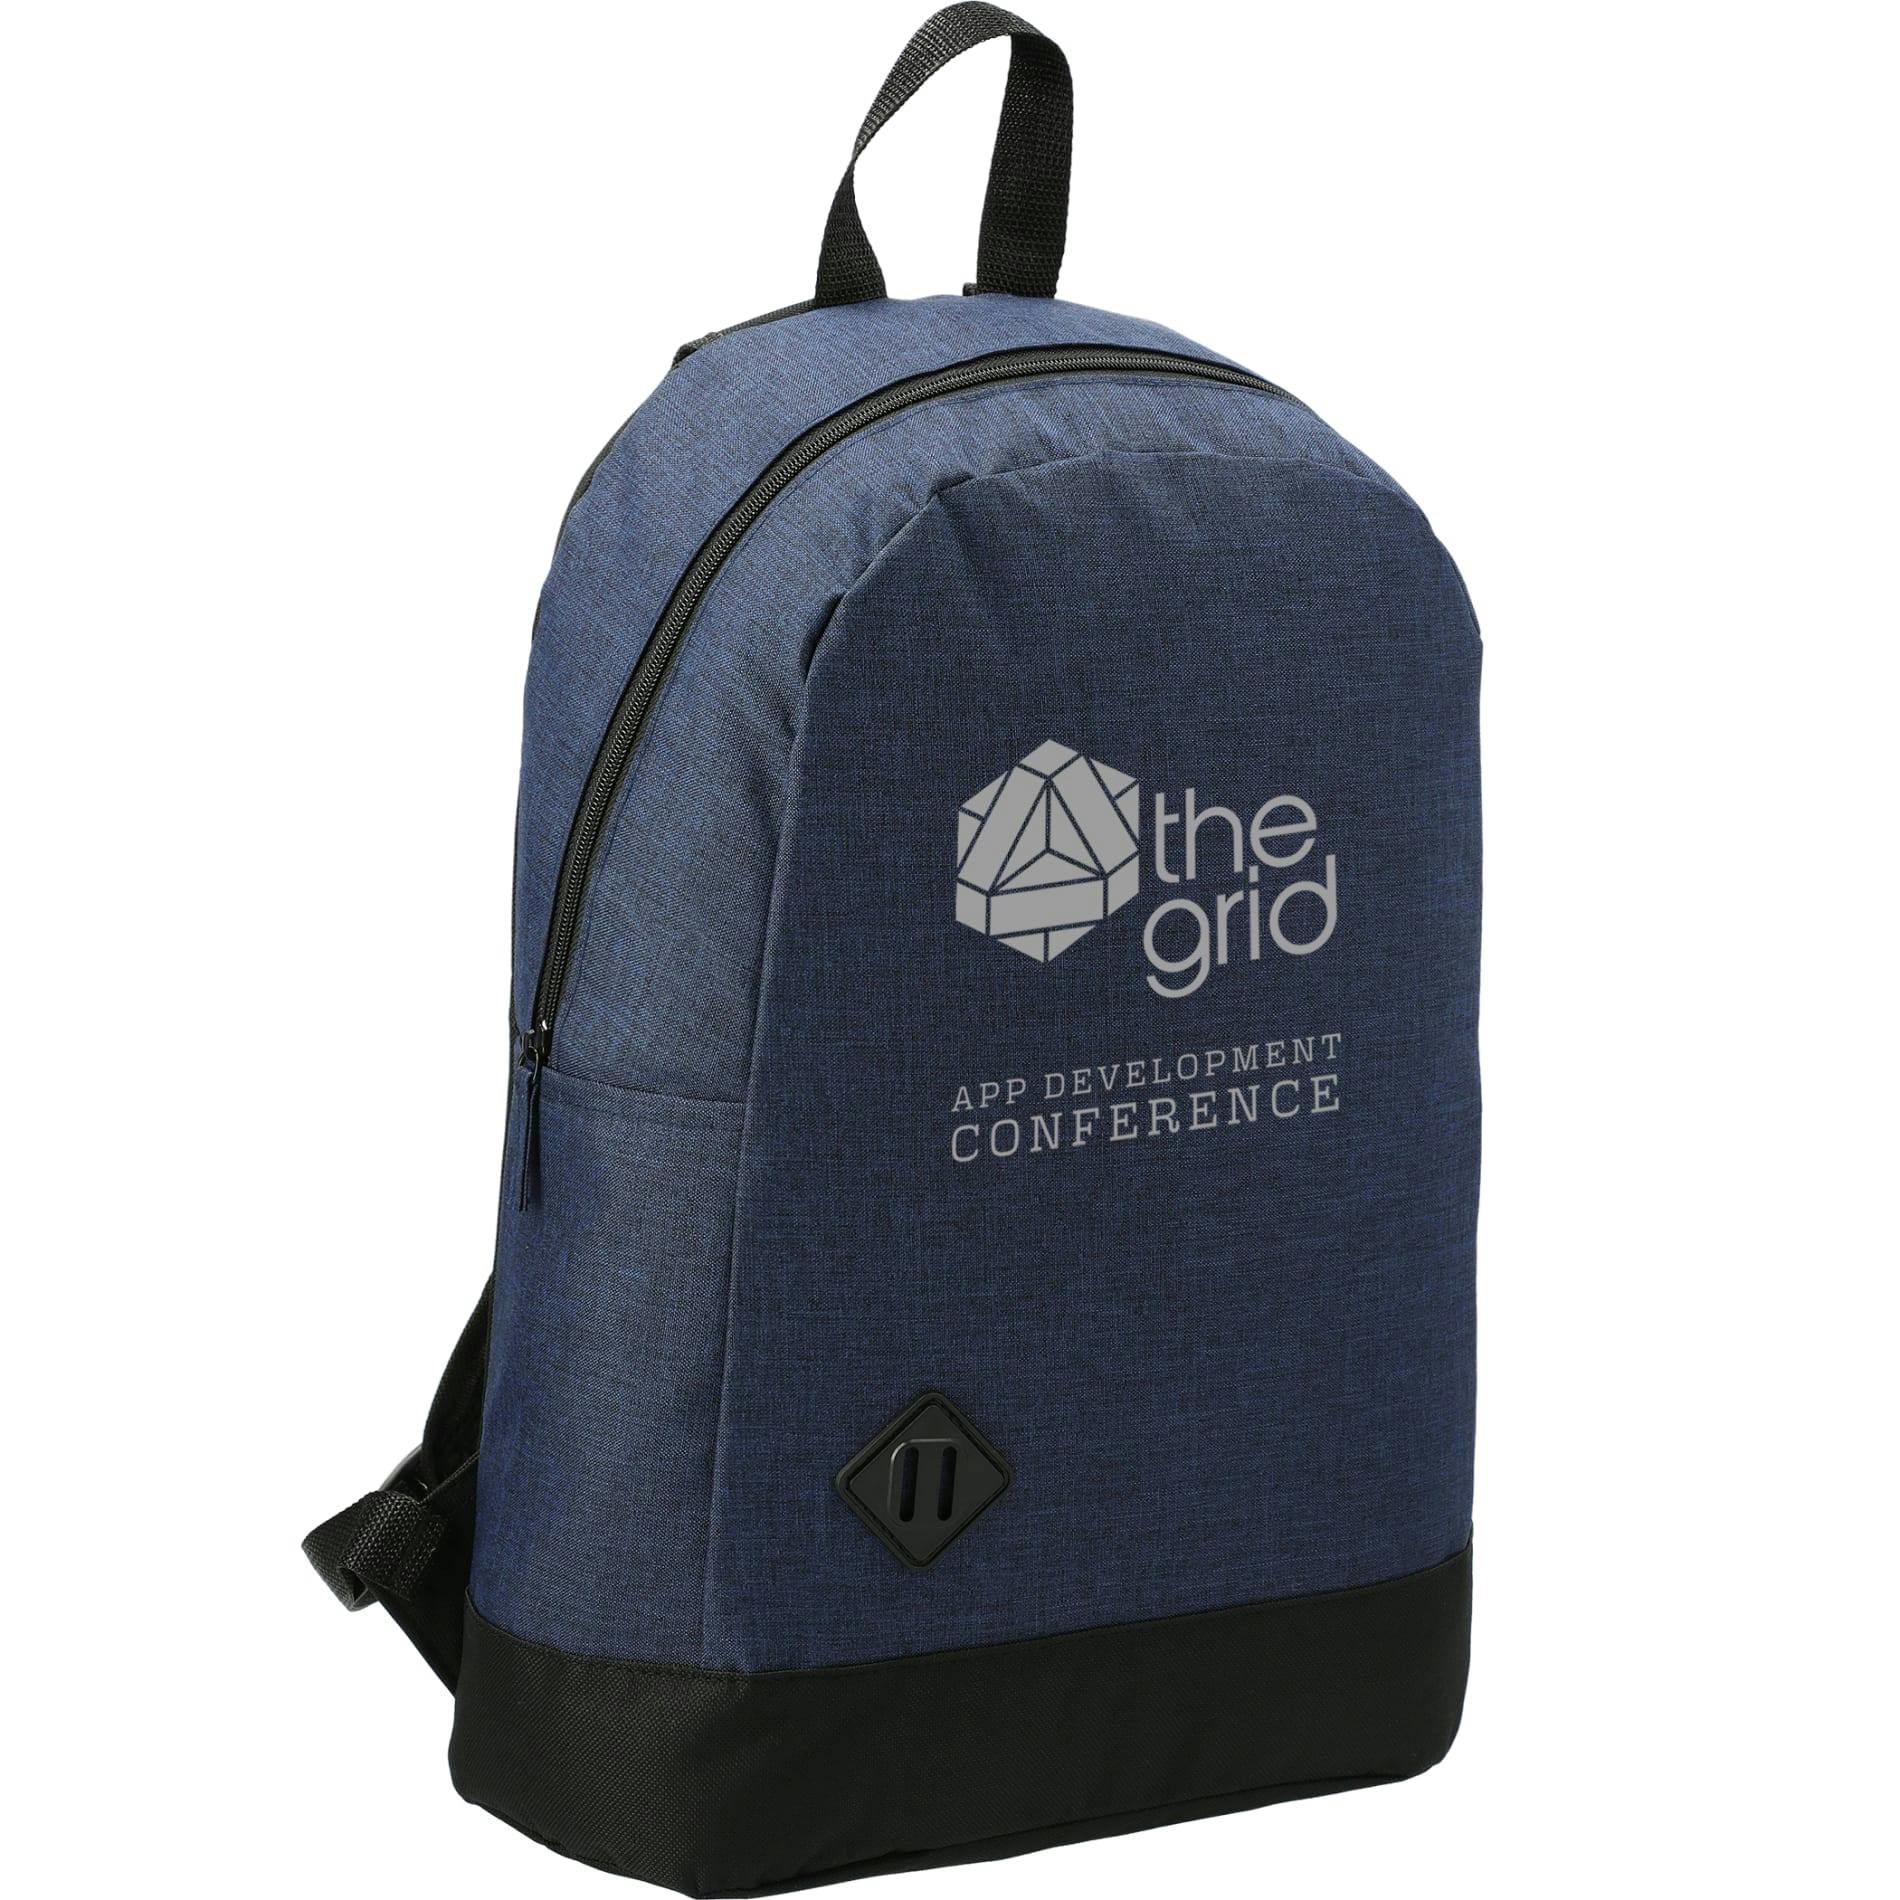 Graphite Dome 15" Computer Backpack - additional Image 5